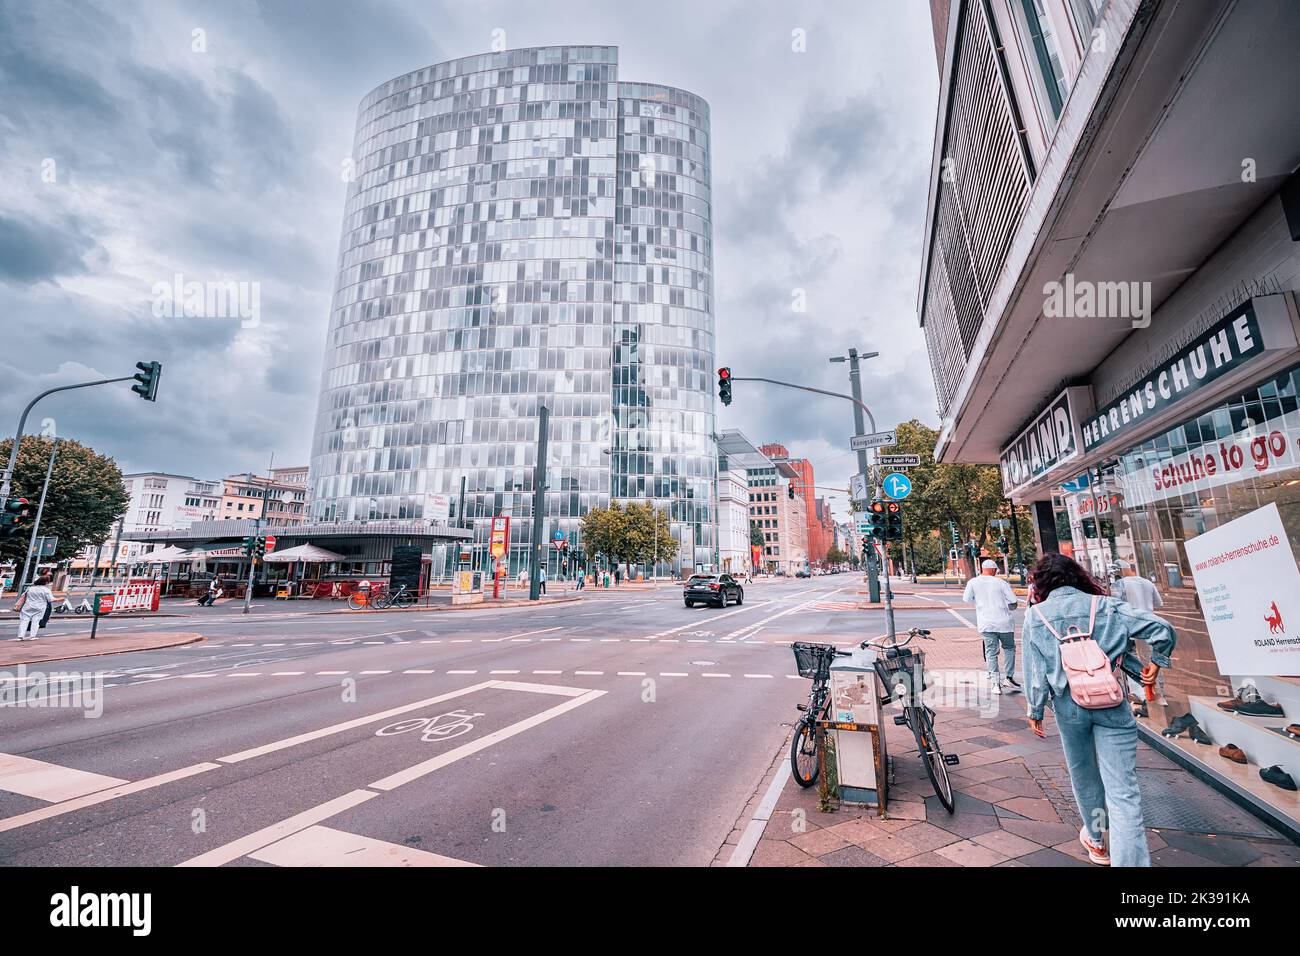 21 July 2022, Dusseldorf, Germany: A street and glass skyscrapers with commercial real estate in a lively area of Dusseldorf Stock Photo